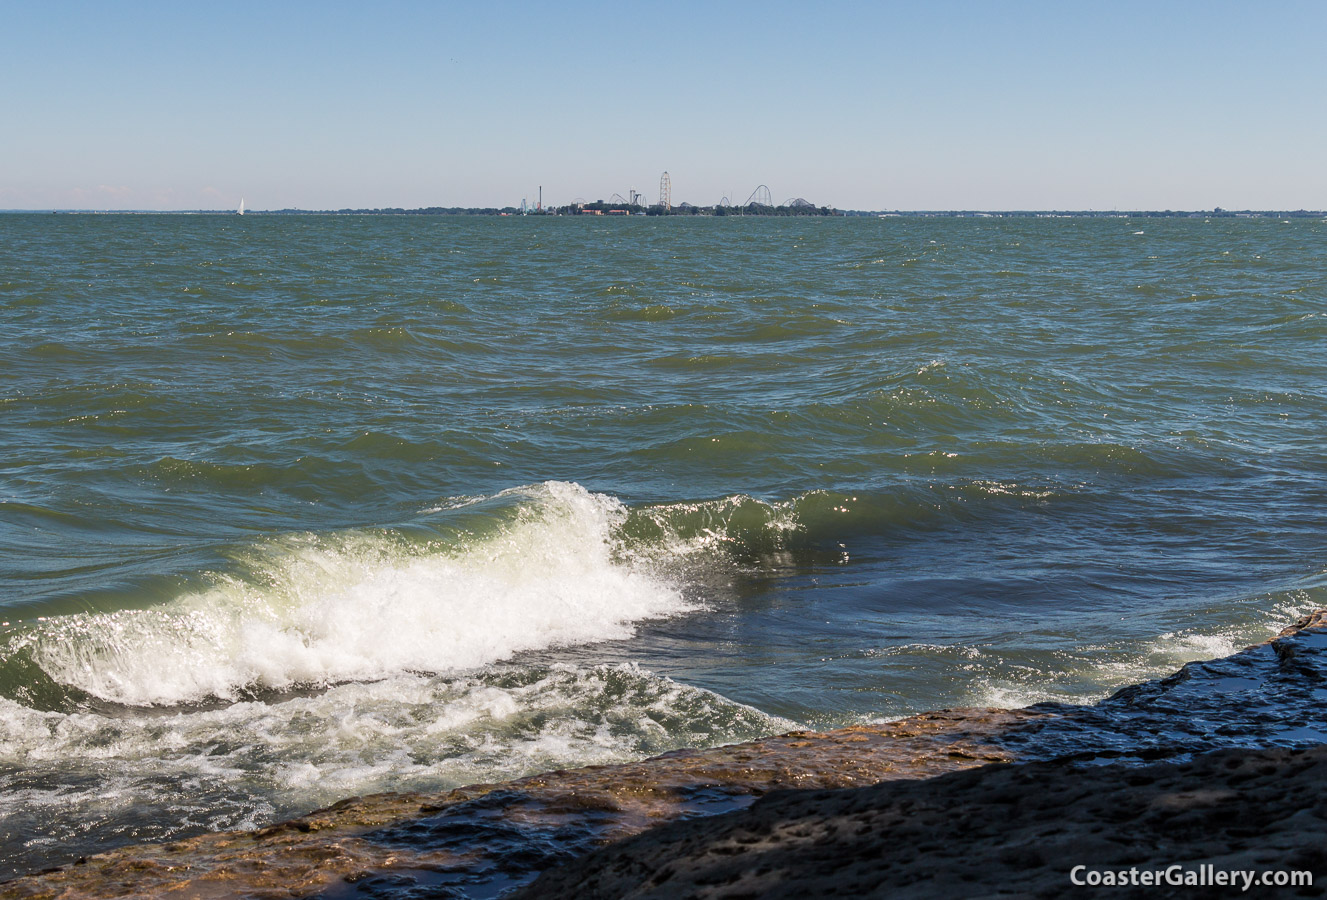 View the Cedar Point peninsula and Lake Erie from the Marblehead Lighthouse